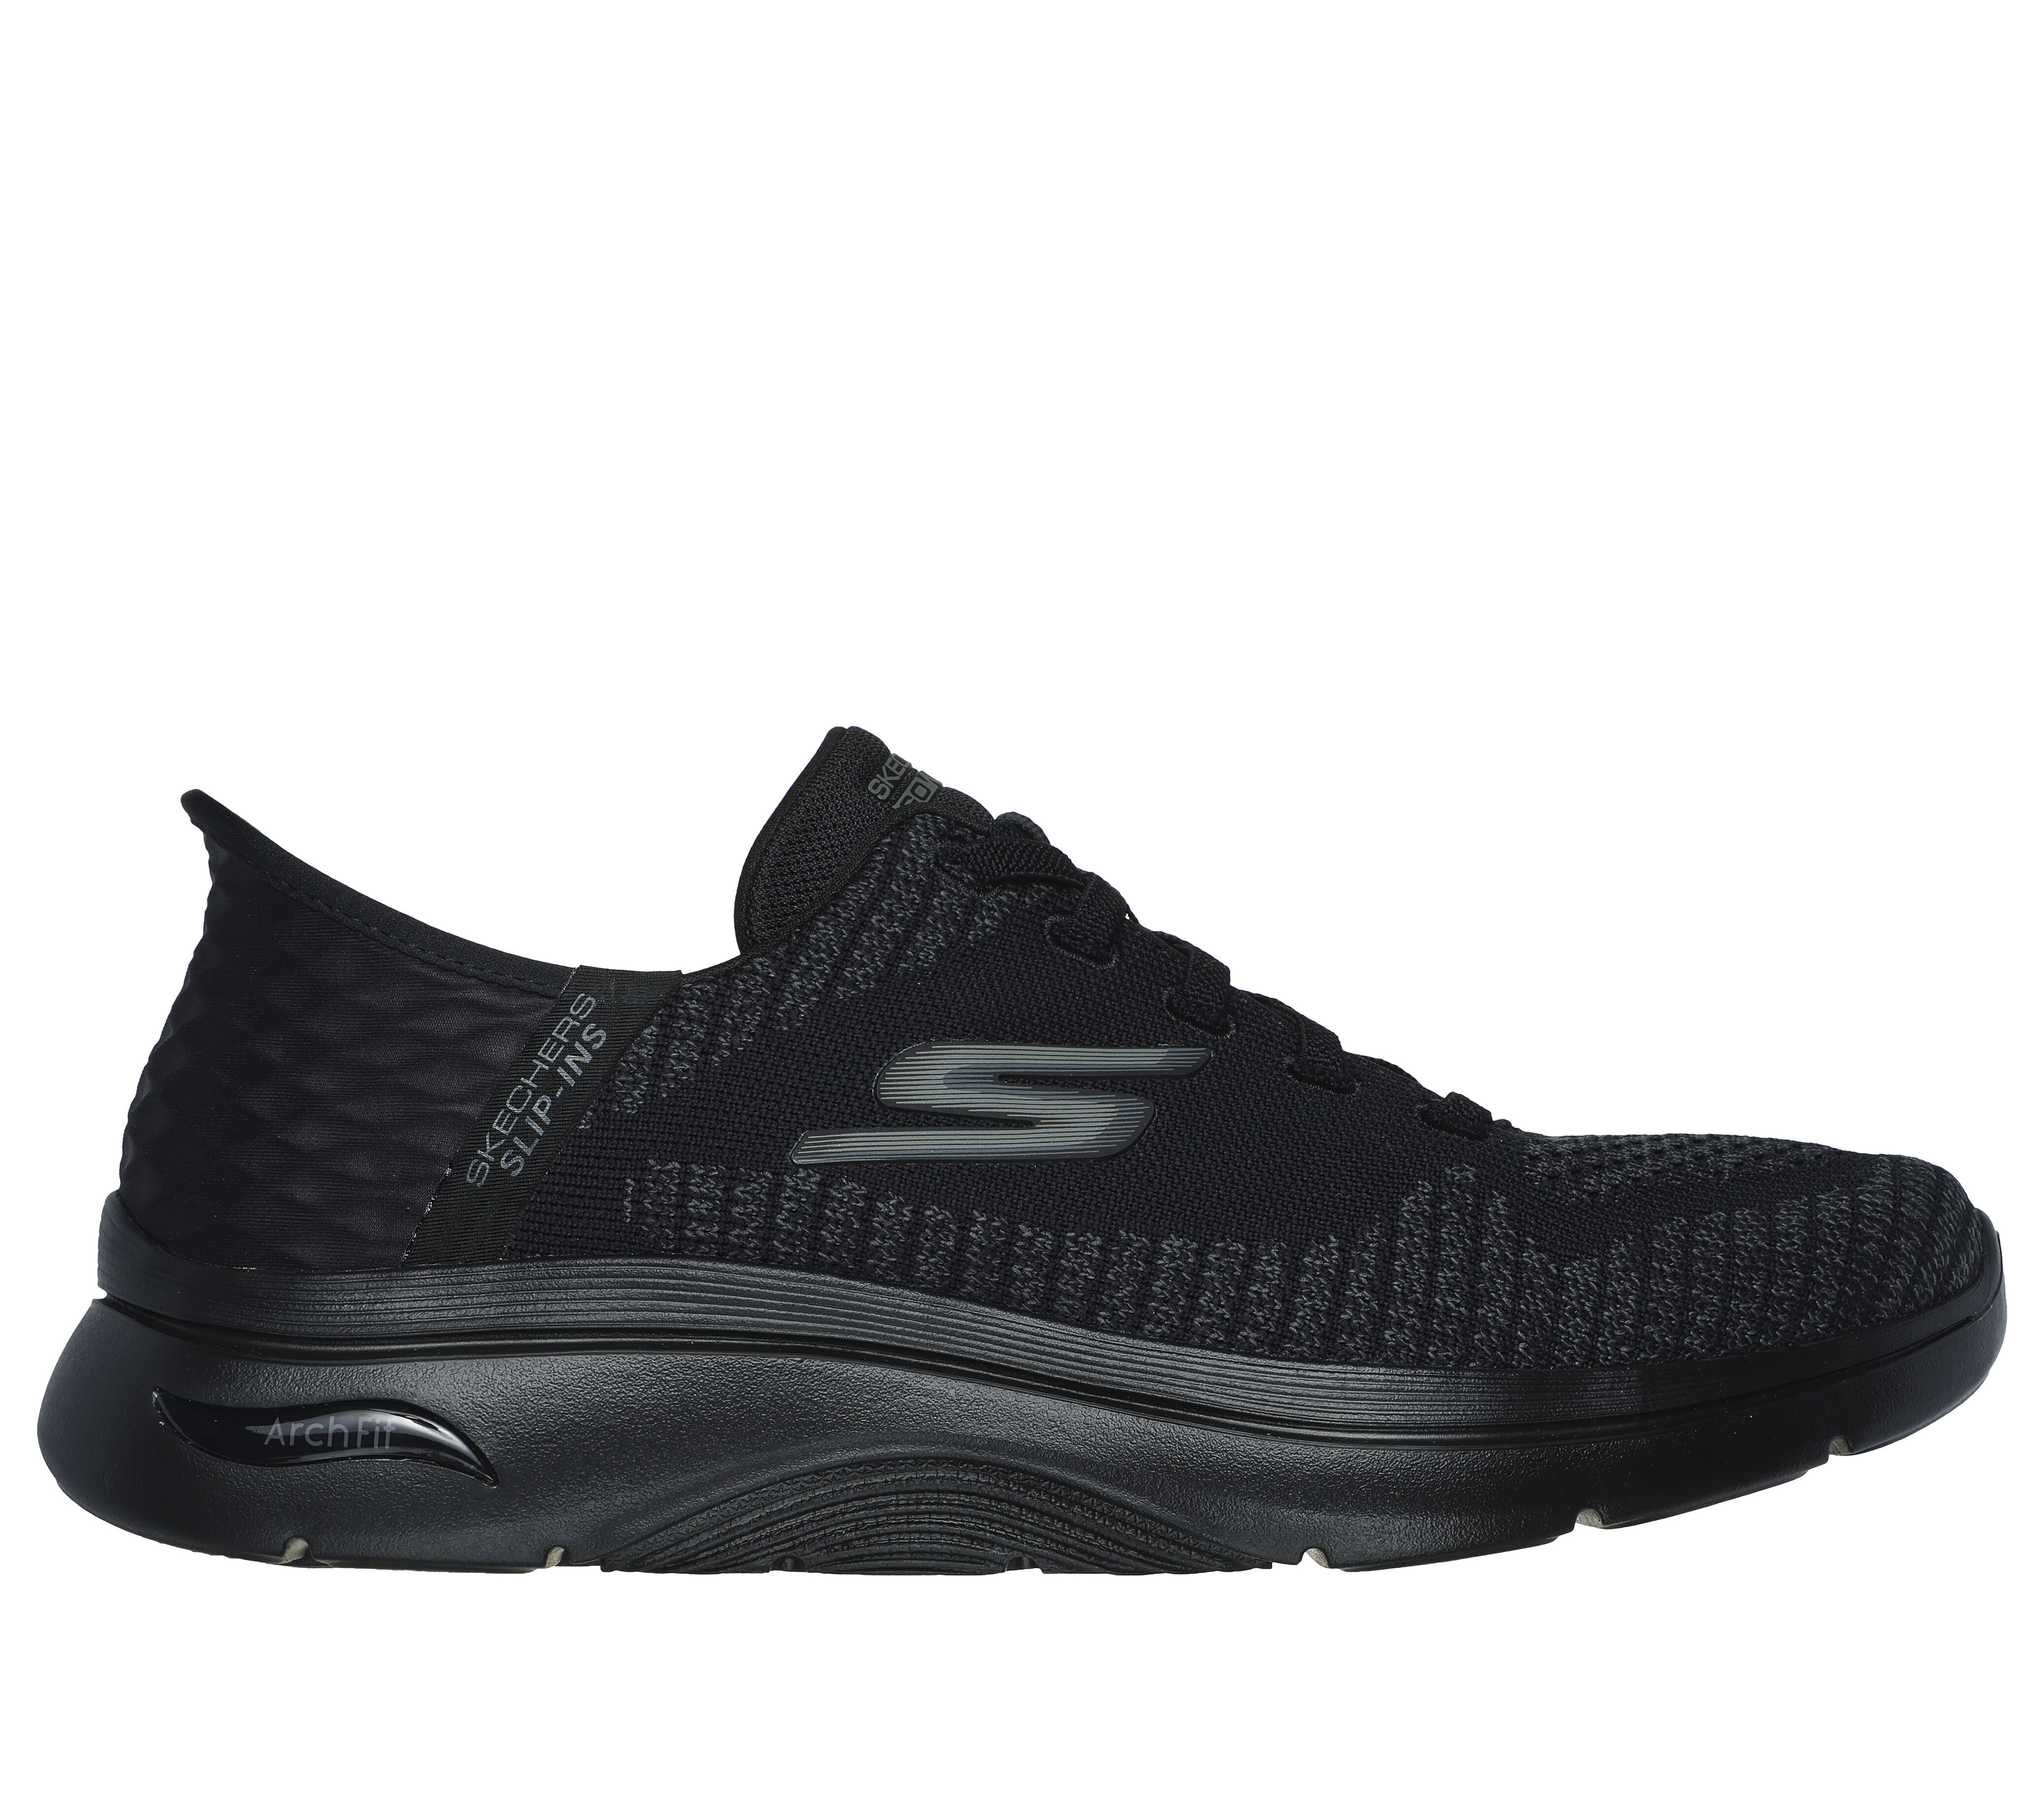 Shop the Skechers Slip-ins: Arch Fit 2.0 - Grand Select 2 